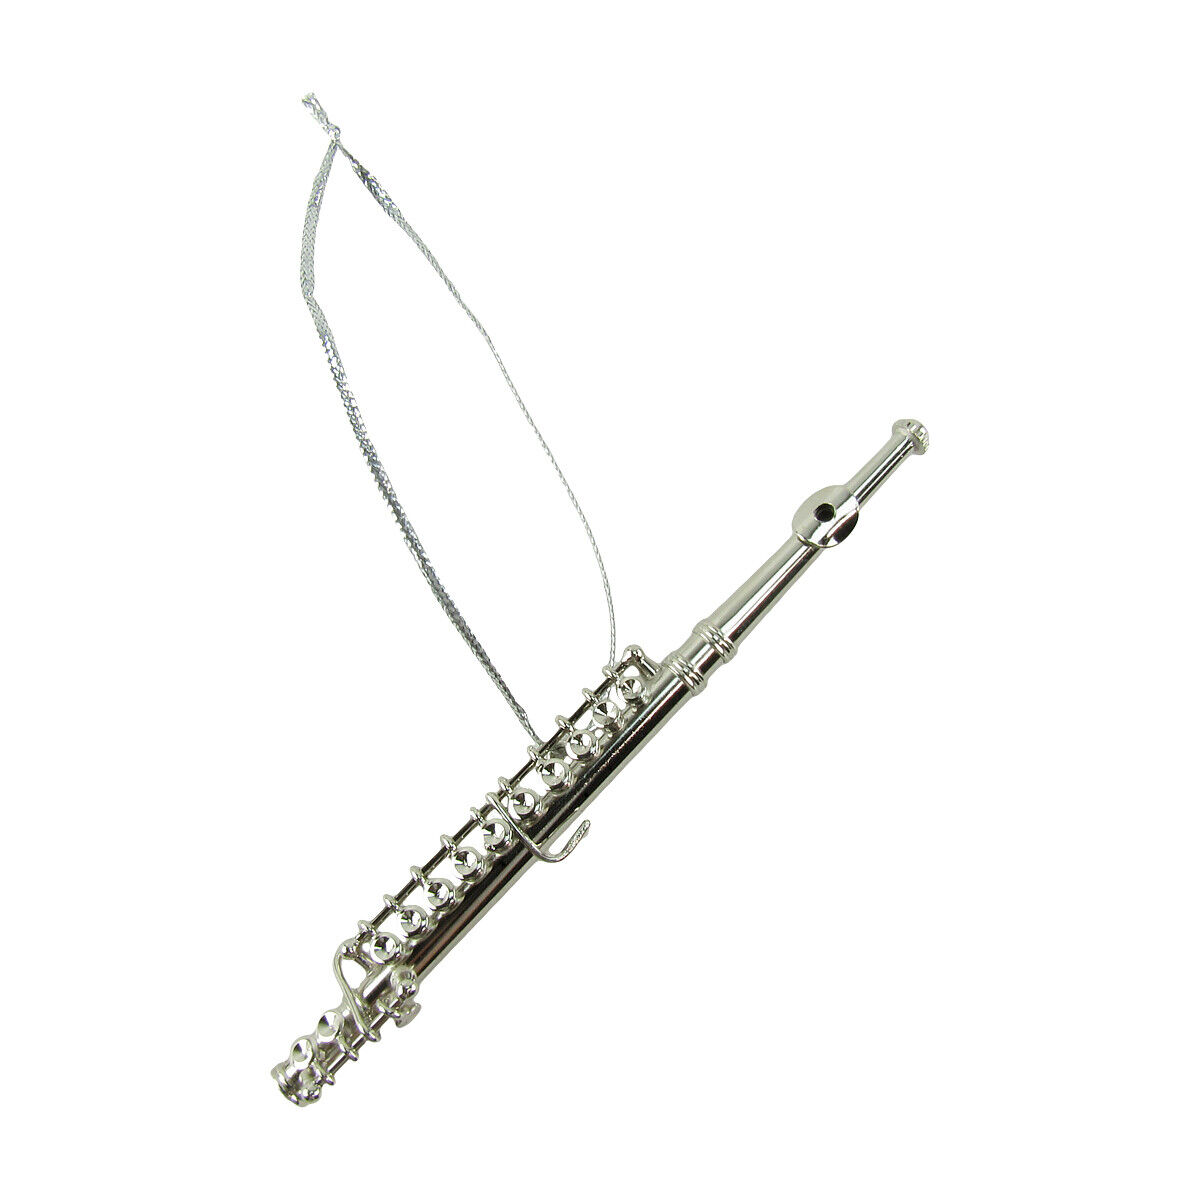 Miniature Silver Flute Musical Instrument Realistic Ornament Marching Band Gift